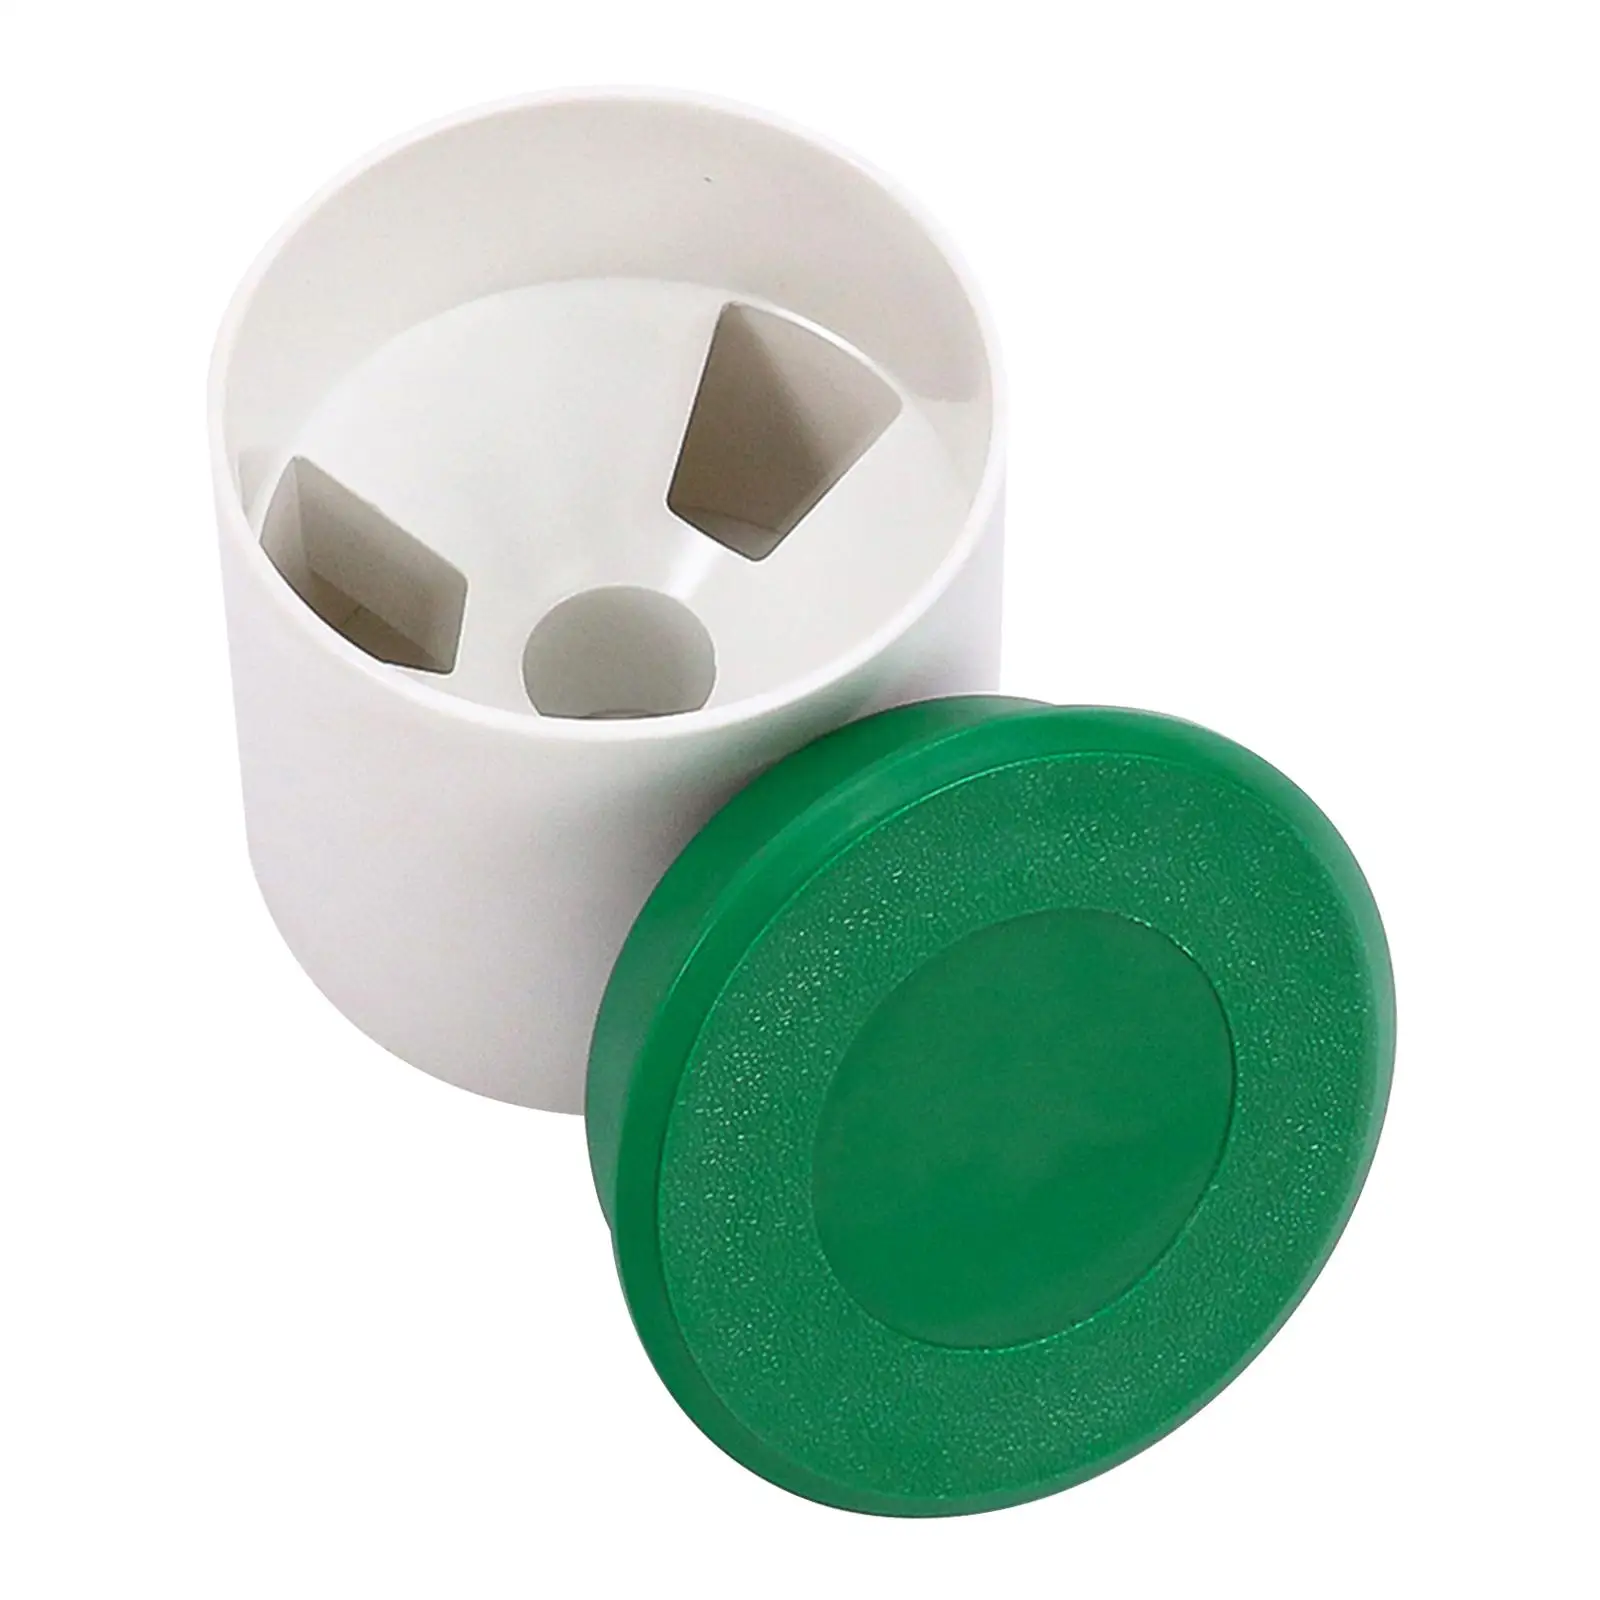 Golf Cup with Cover Protective Cap Protector for Putt Practice Tools Accessories